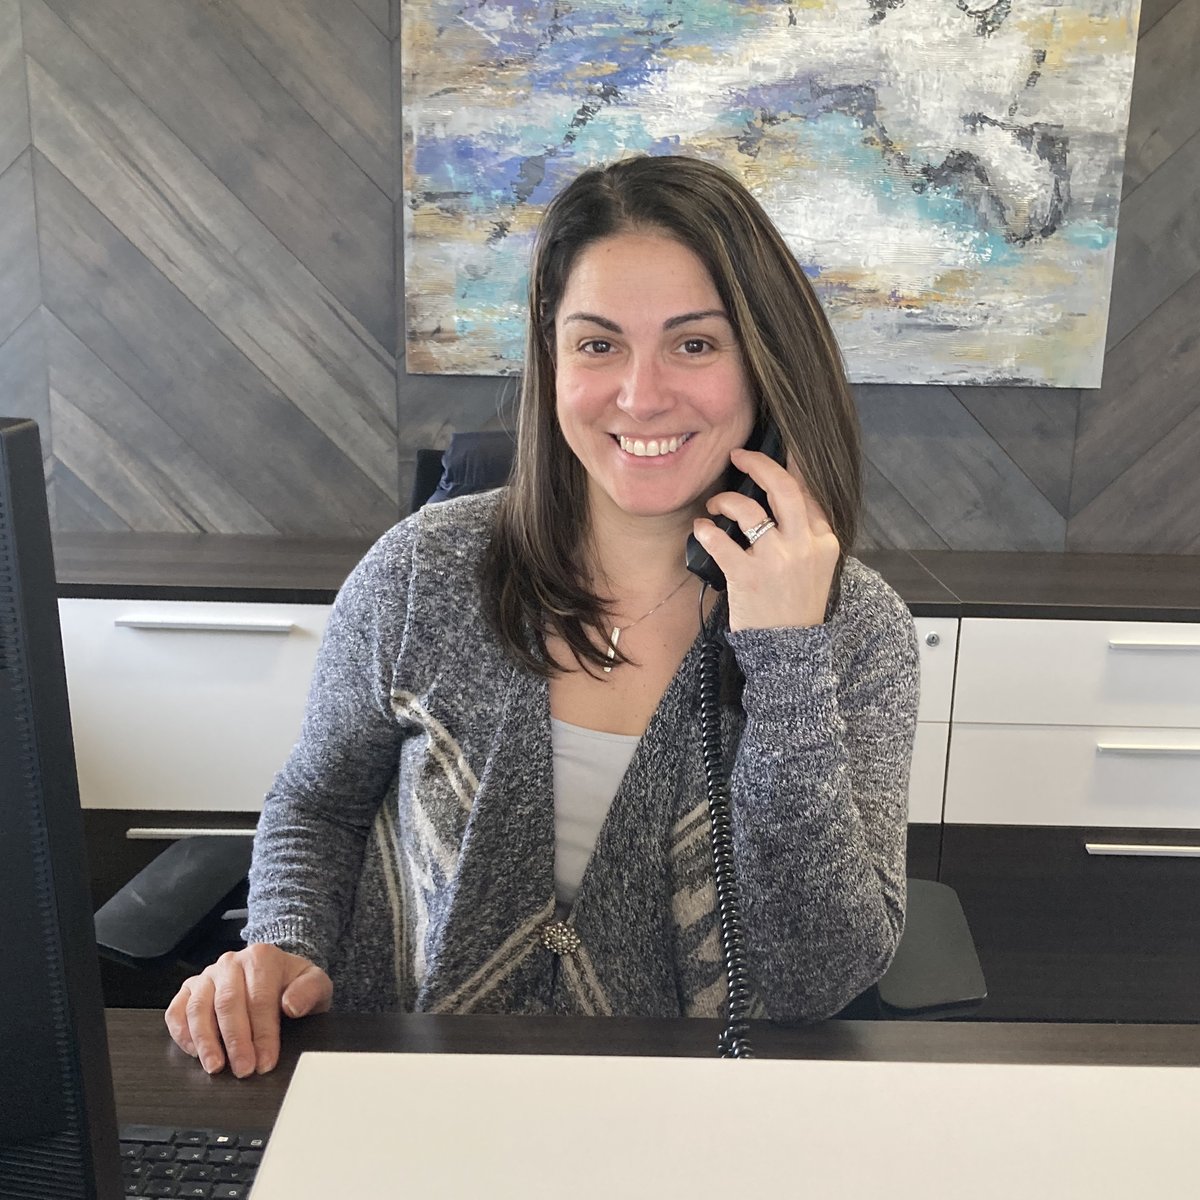 Today, we’re celebrating Administrative Professionals Day at Mason Homes.
We’d like to give a shoutout to Lori whose hard work & dedication keep our office running smoothly every day.
Thank you Lori & cheers to all the #administrativeprofessionals for all you do!

#masonfamily